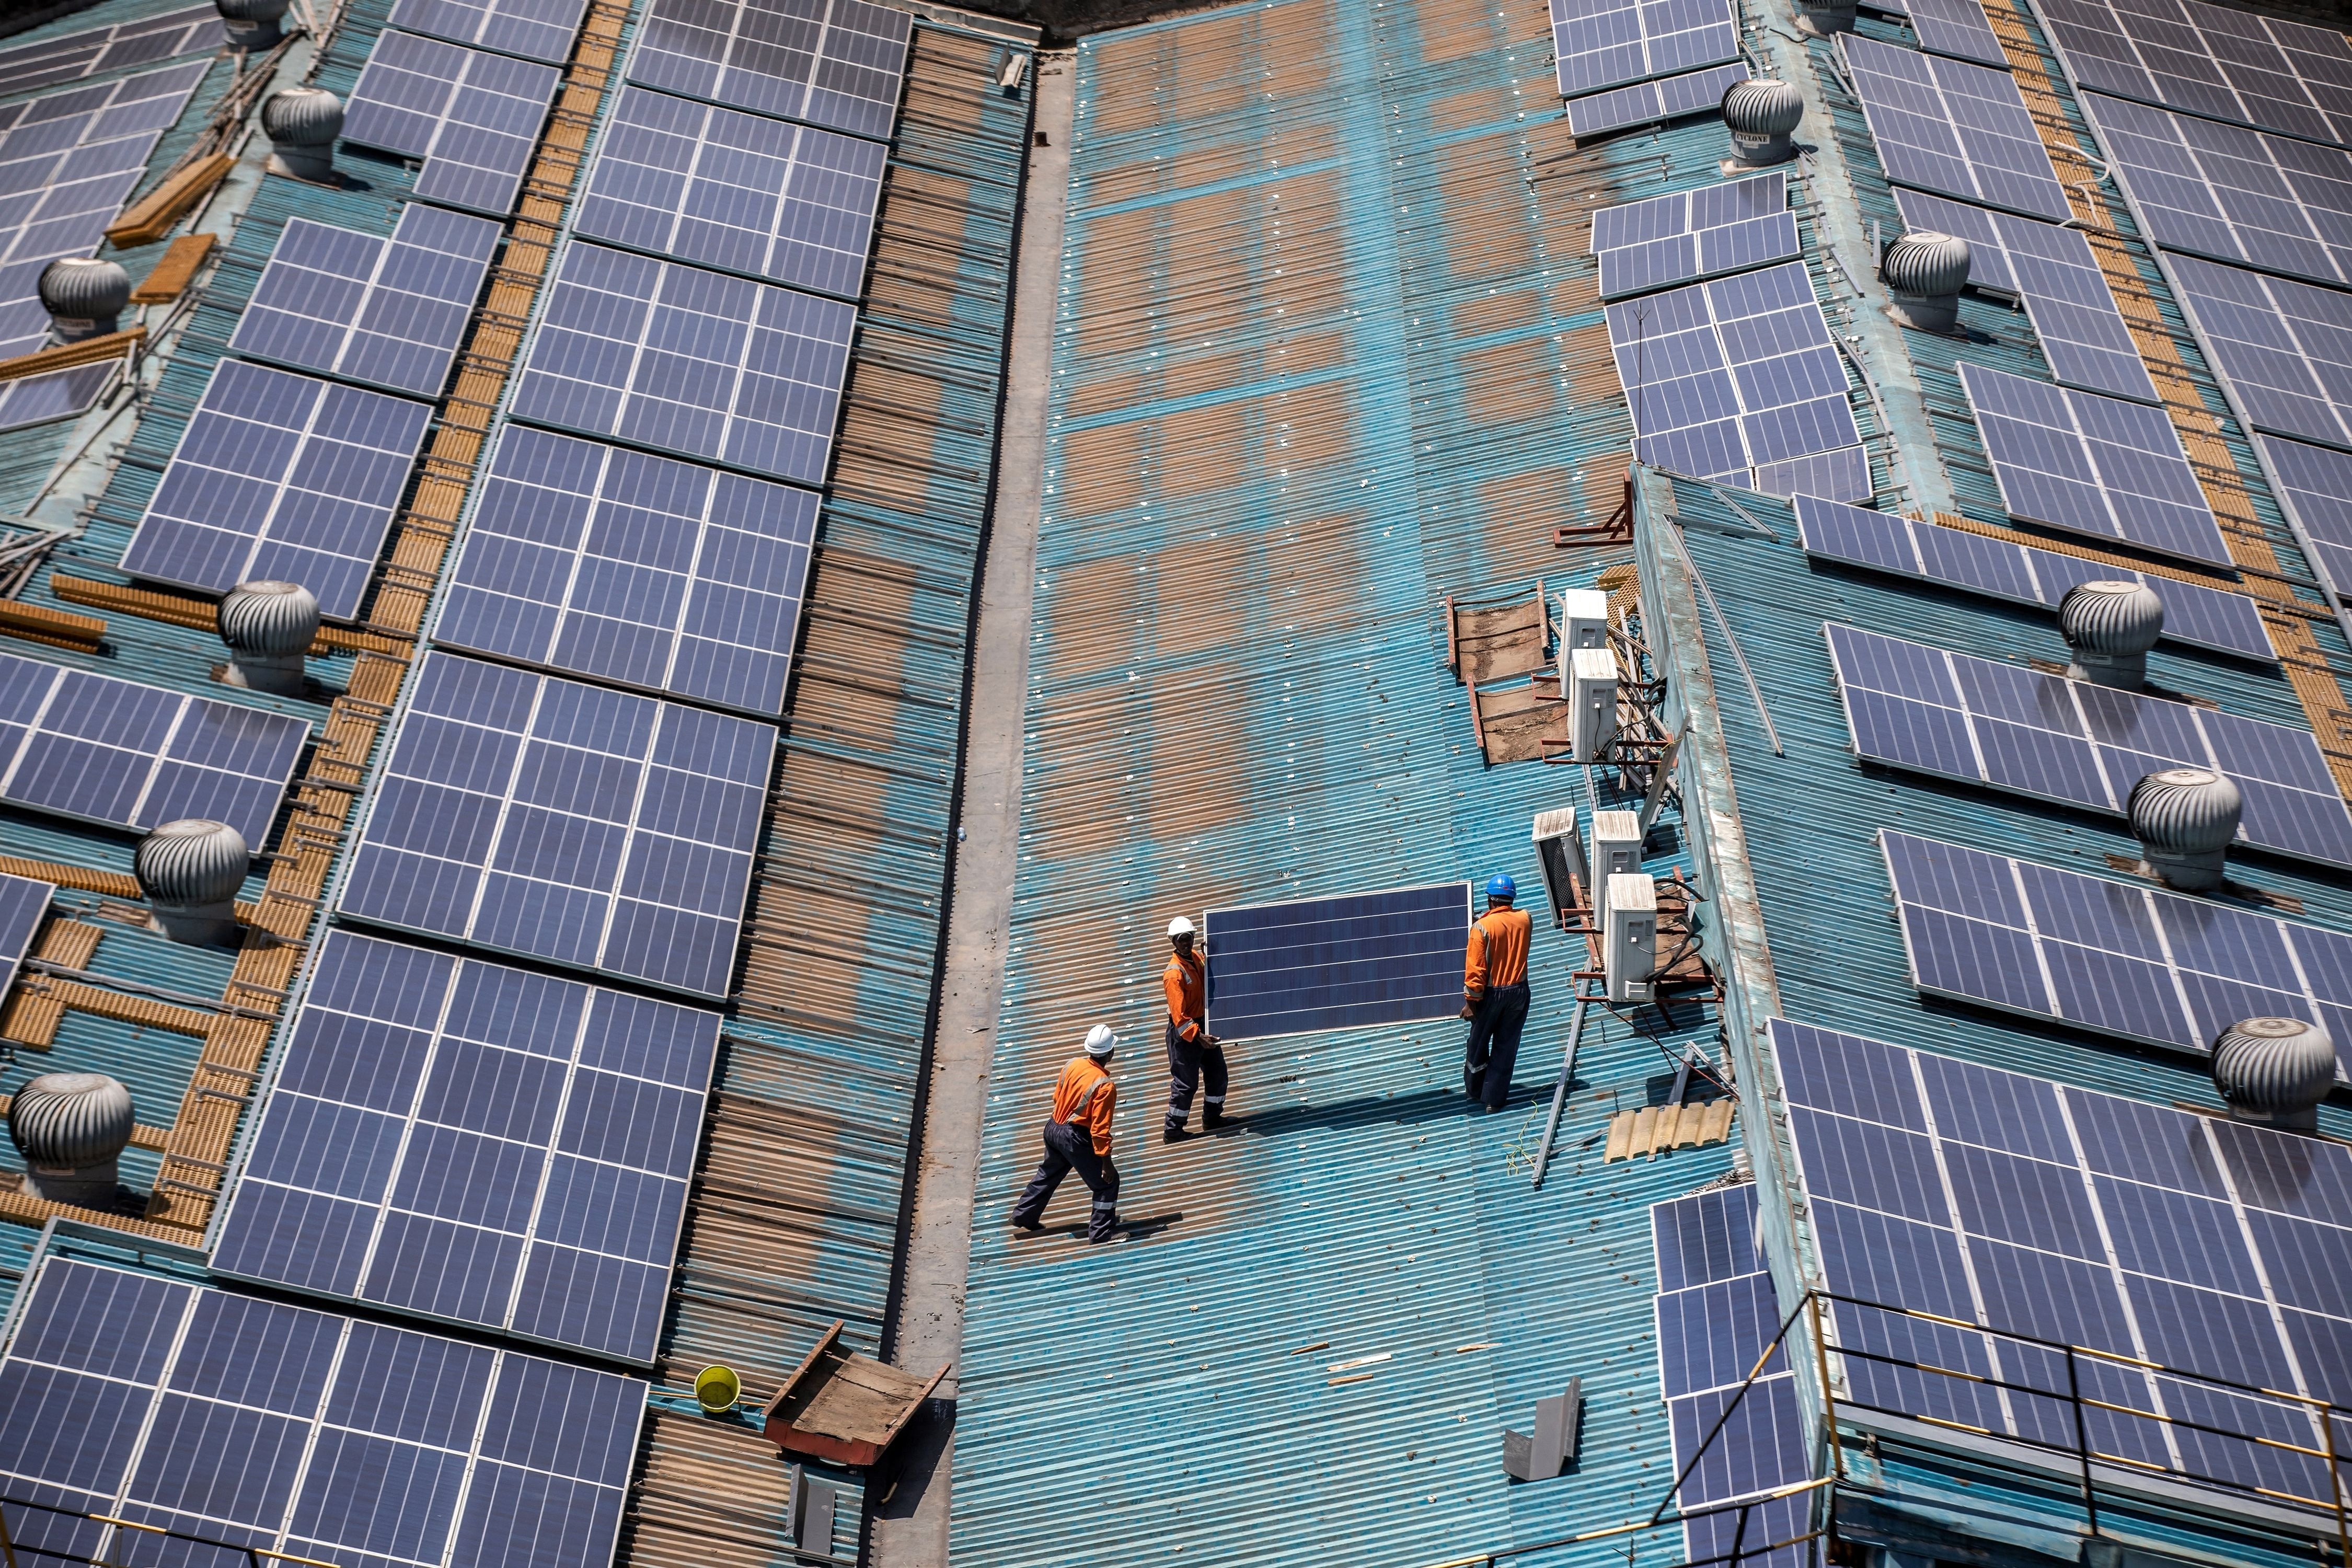 Technicians in orange gear install solar panels on a large rooftop.